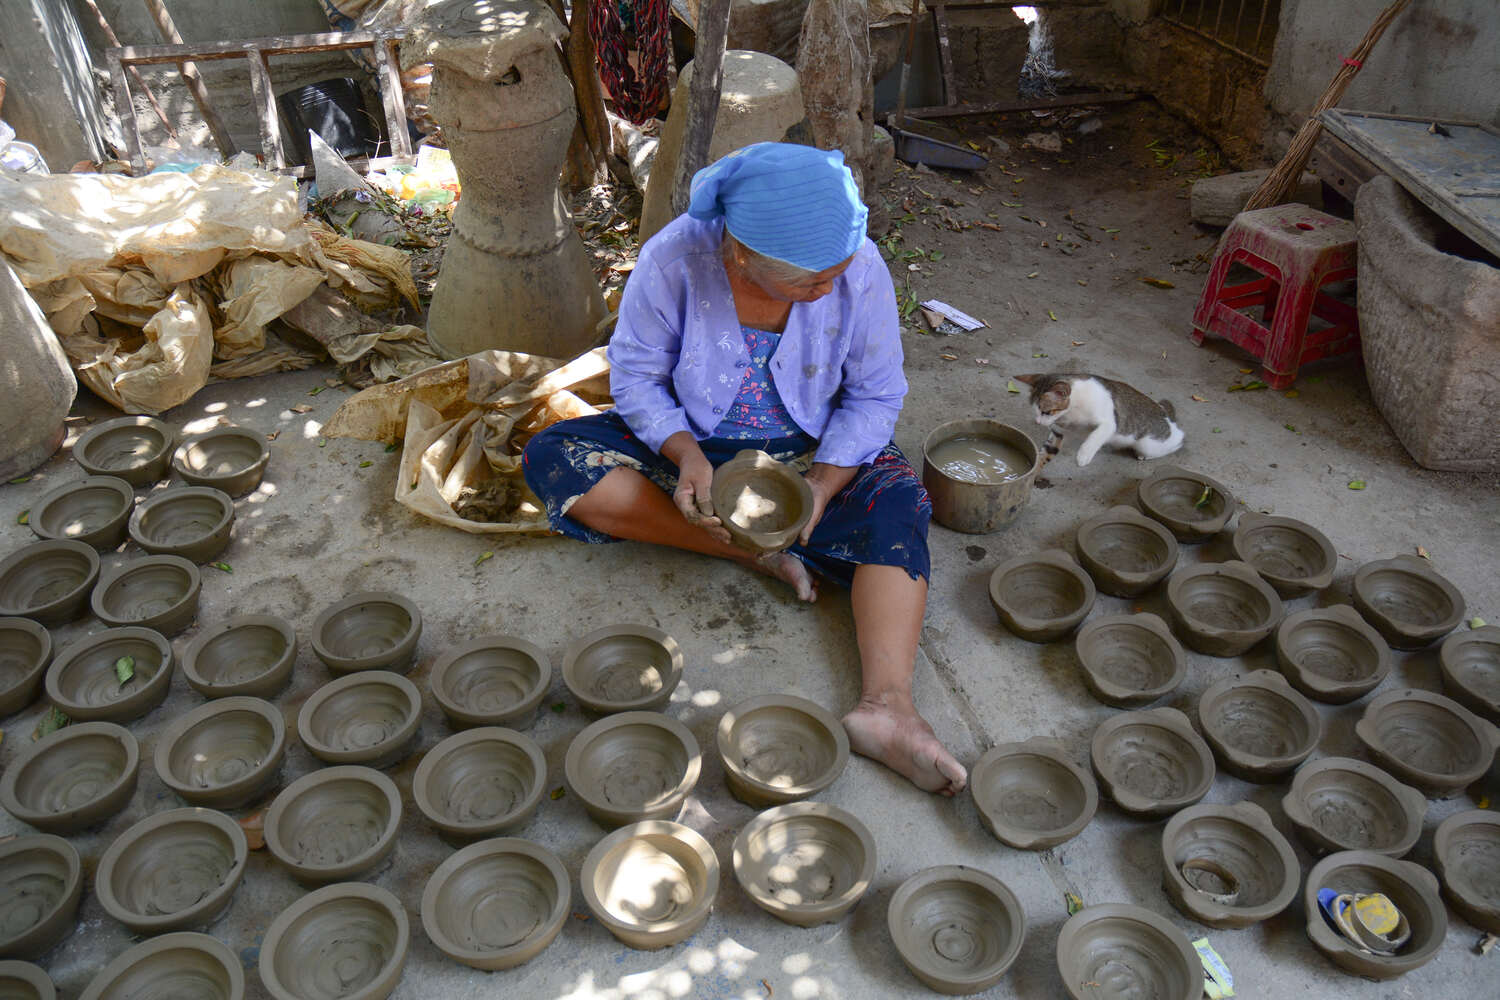 Traditional Vietnamese pottery making with an elder woman crafting bowls in an outdoor workshop.